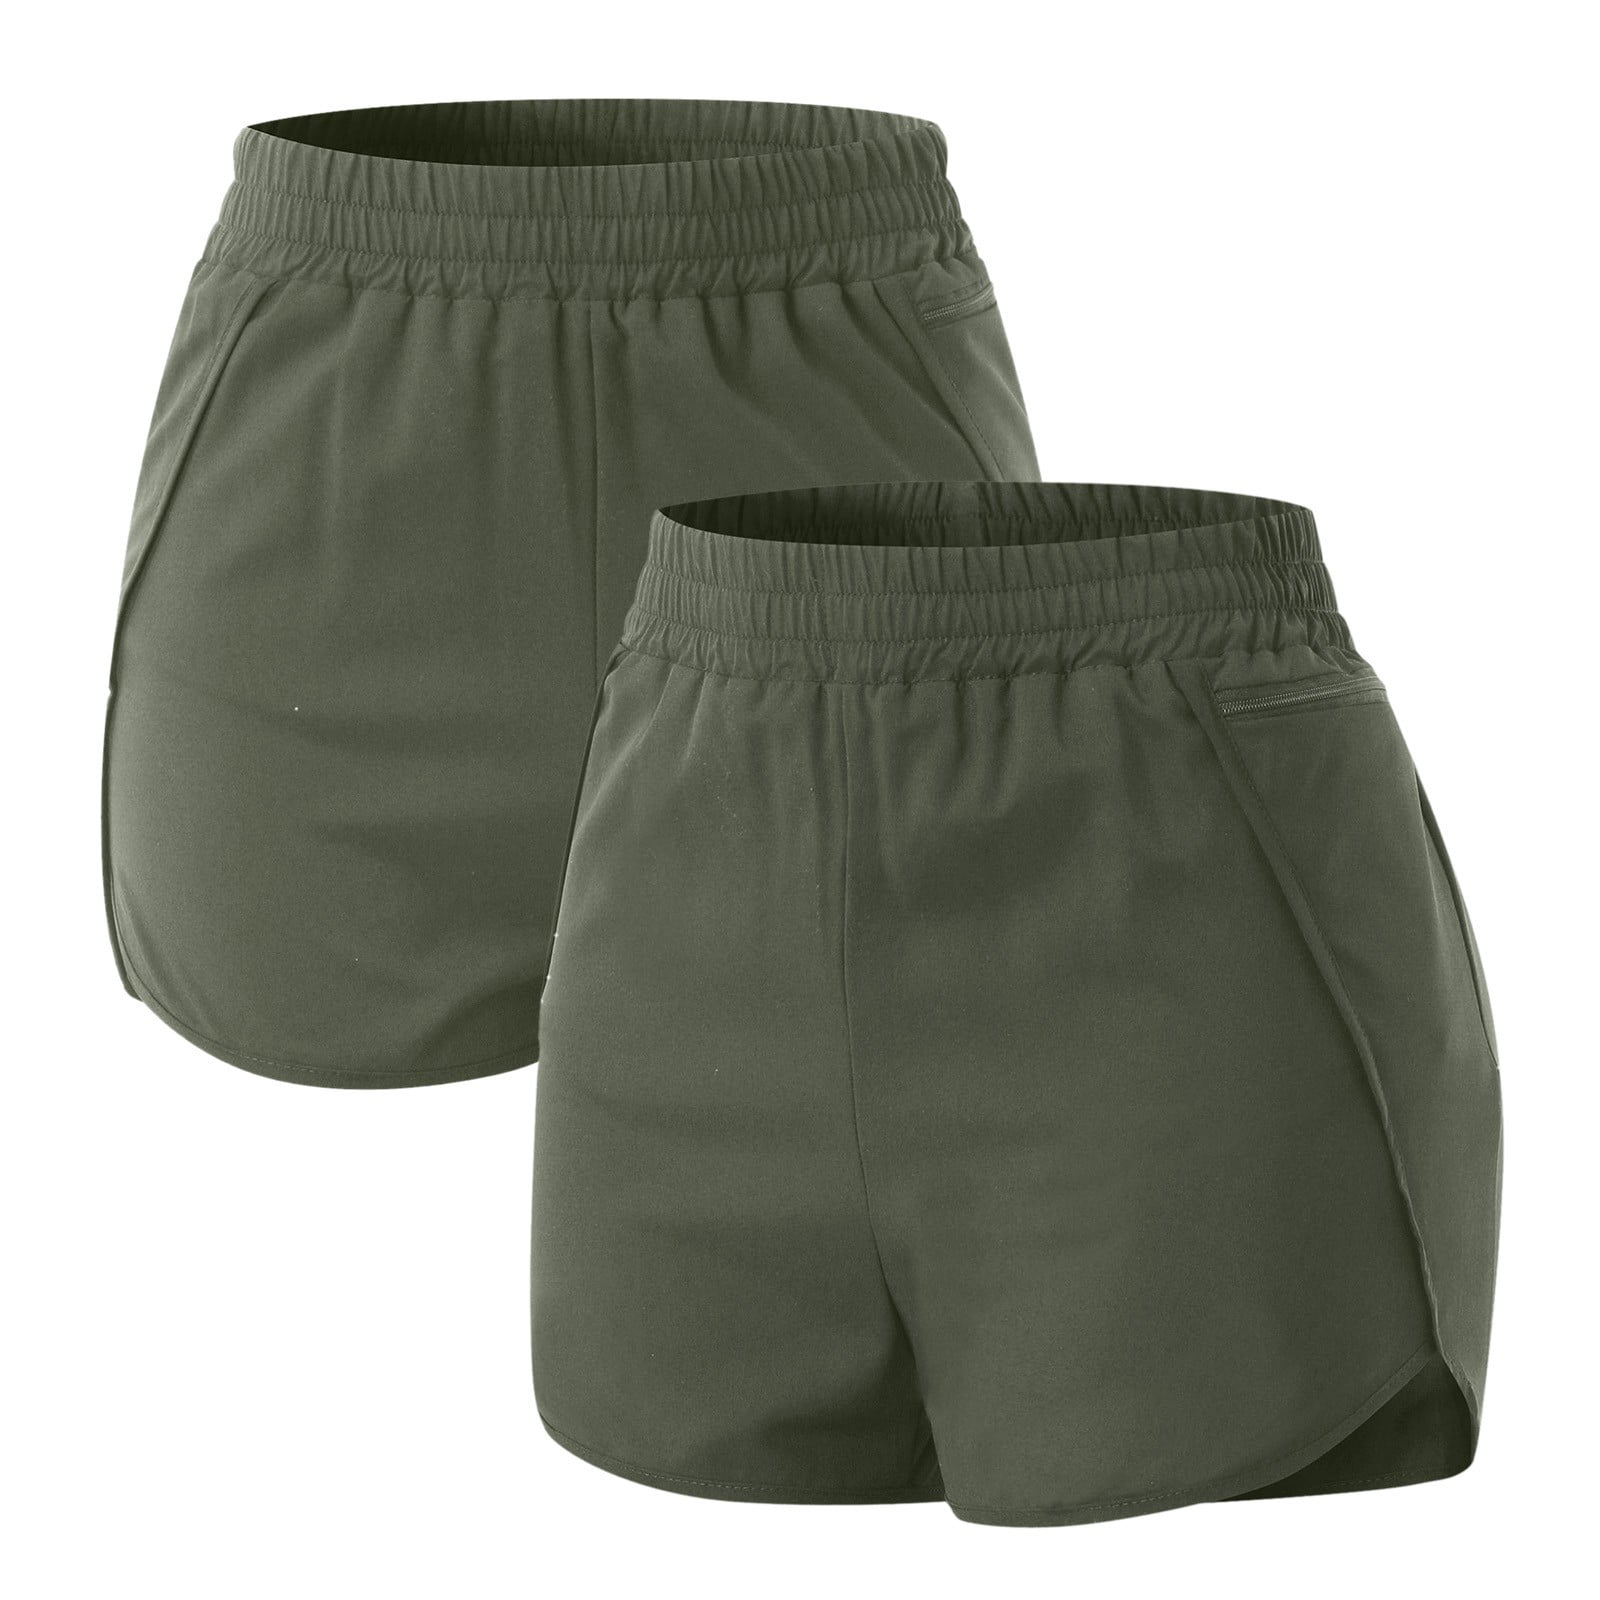 Women's Training Loose Shorts in Military Duck